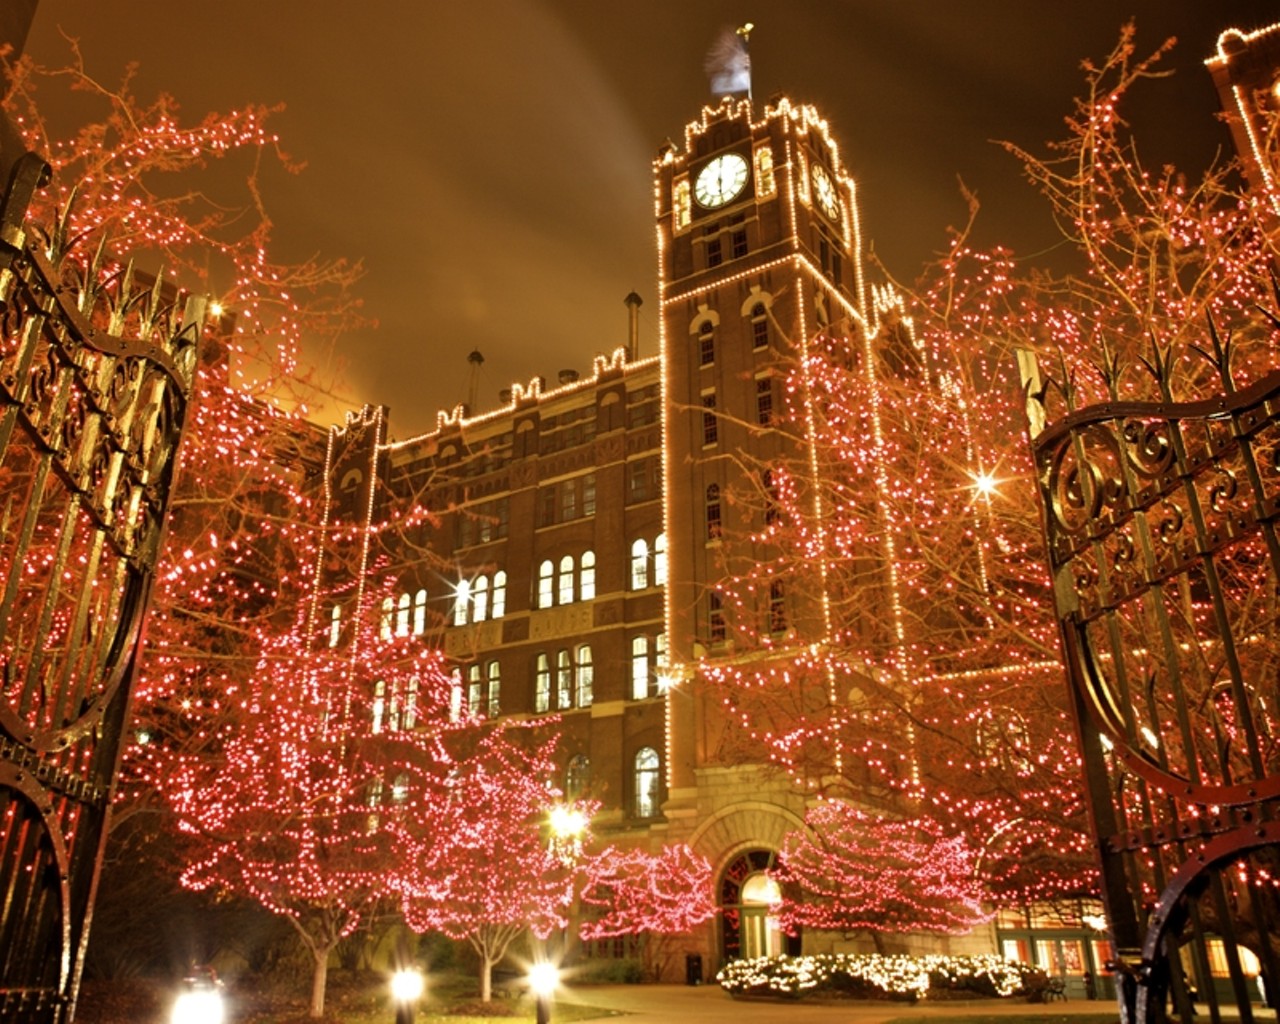 Anheuser-Busch Brewery
1200 Lynch St.
St. Louis, MO 63118
(314) 577-2626
You already love the Anheuser-Busch brewery lights during the holiday season. Now you can turn that spirit up a notch with a few laps around the all-new skating rink. You can partake in the fun now through December 30. Photo courtesy of Anheuser-Busch.